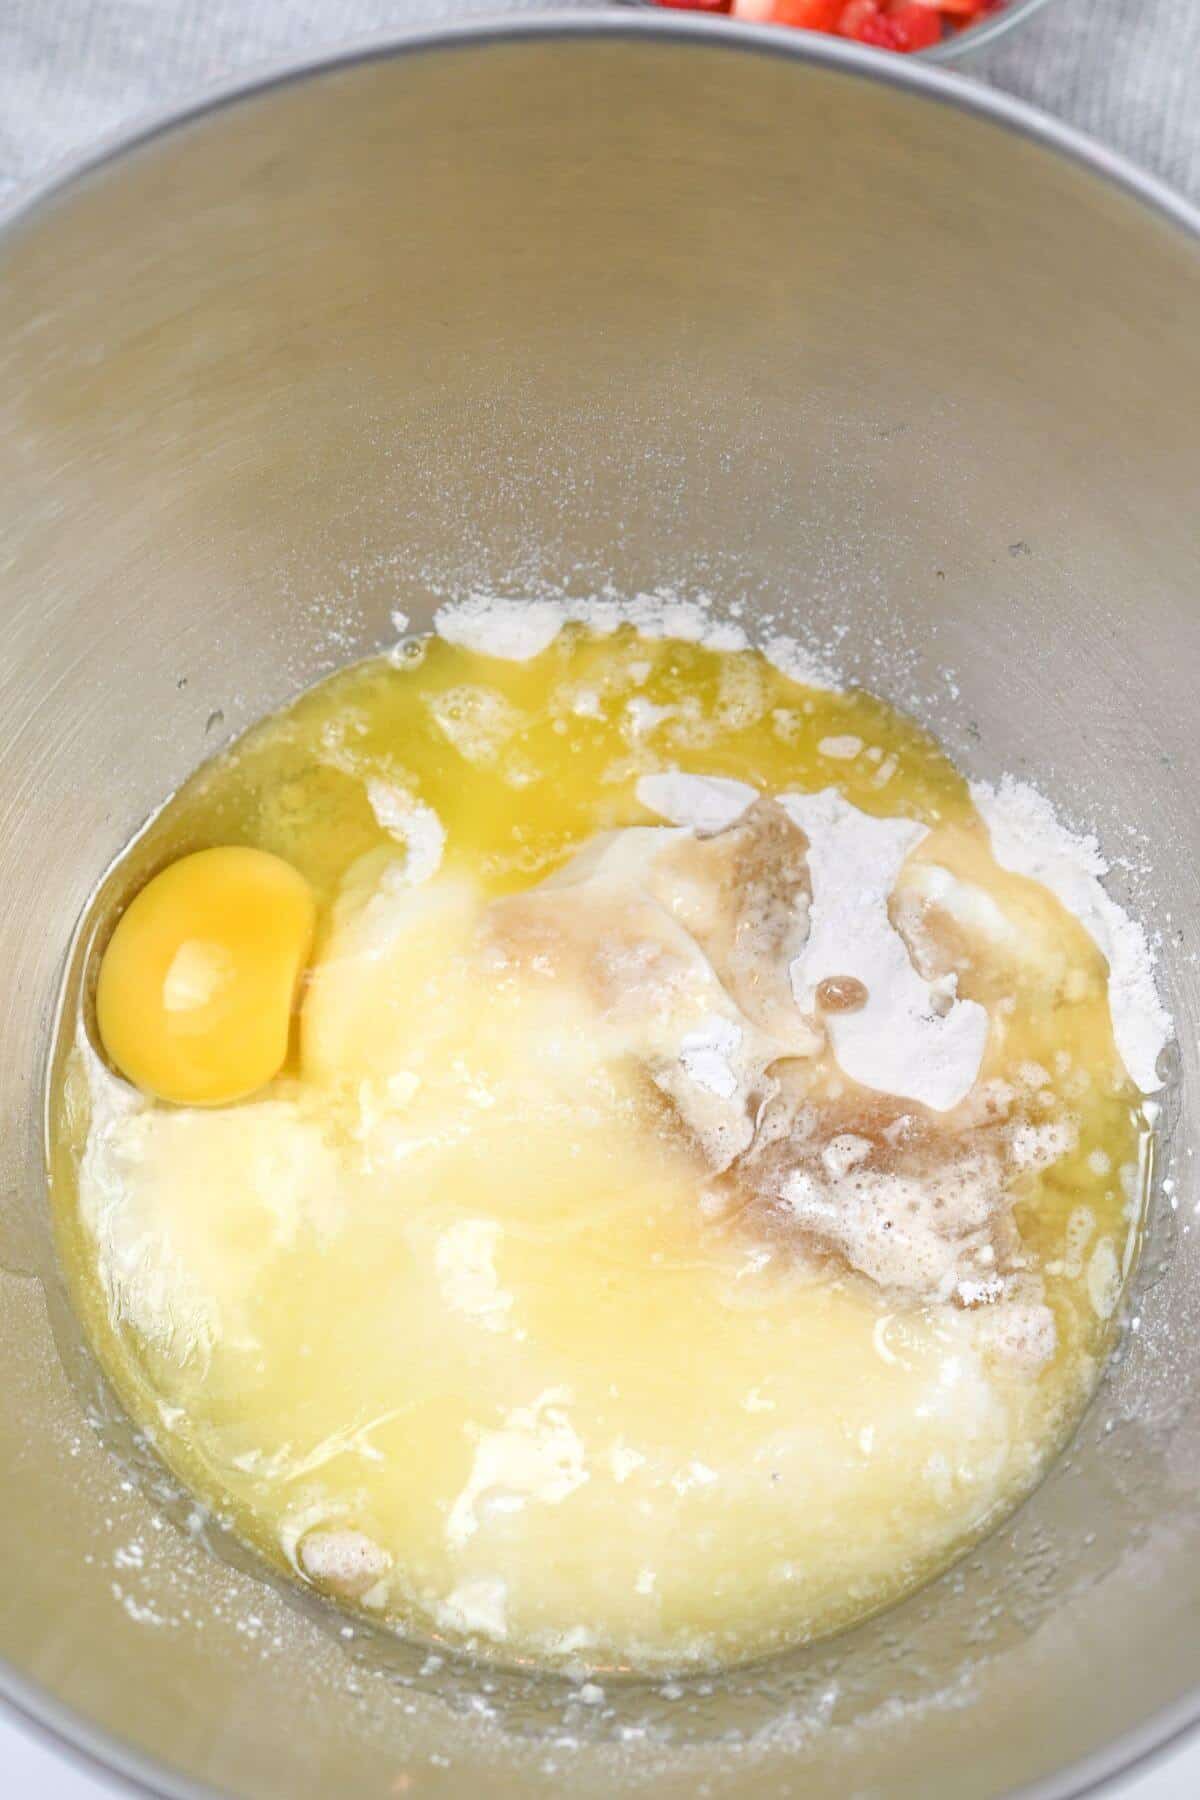 A mixing bowl with strawberry pound cake mixture, including eggs, flour, and sugar.